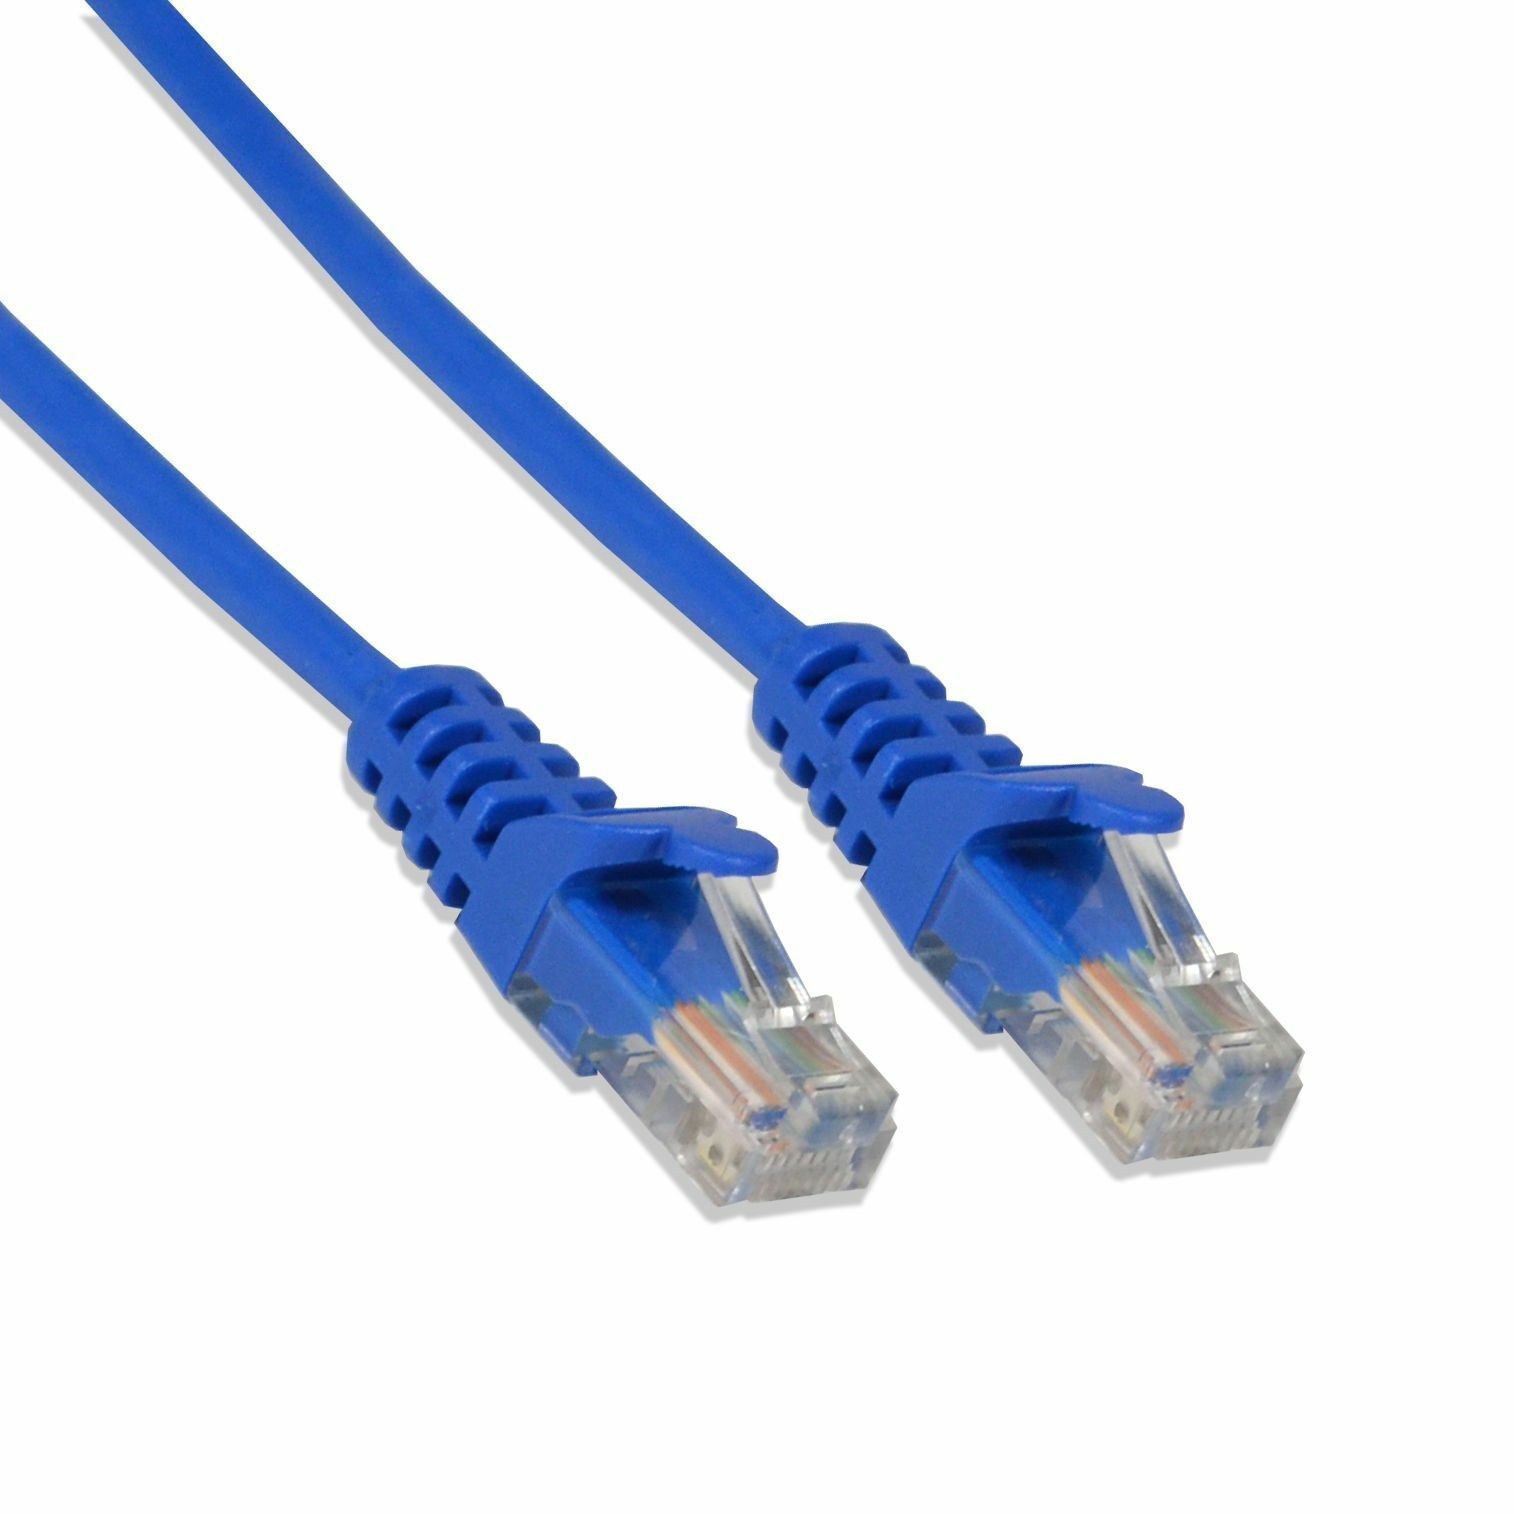 7ft Cat6 Cable Ethernet Lan Network RJ45 Patch Cord Internet Blue (50 Pack)